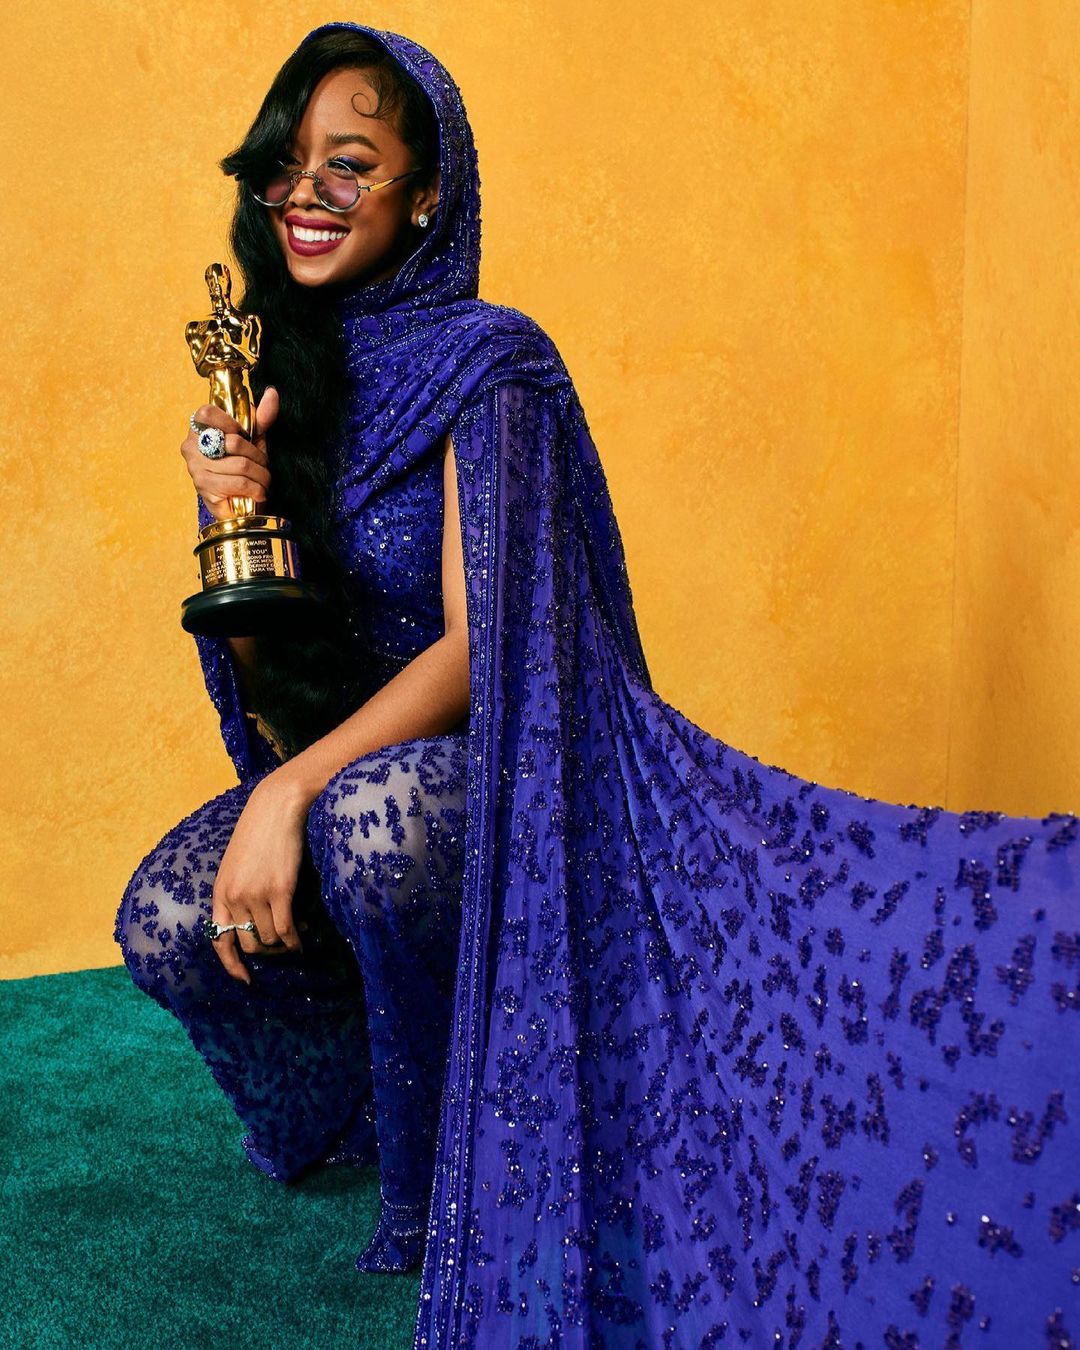 This Year's Official Oscar Portraits Were Captured By 23-Year-Old Black Photographer Quil Lemons